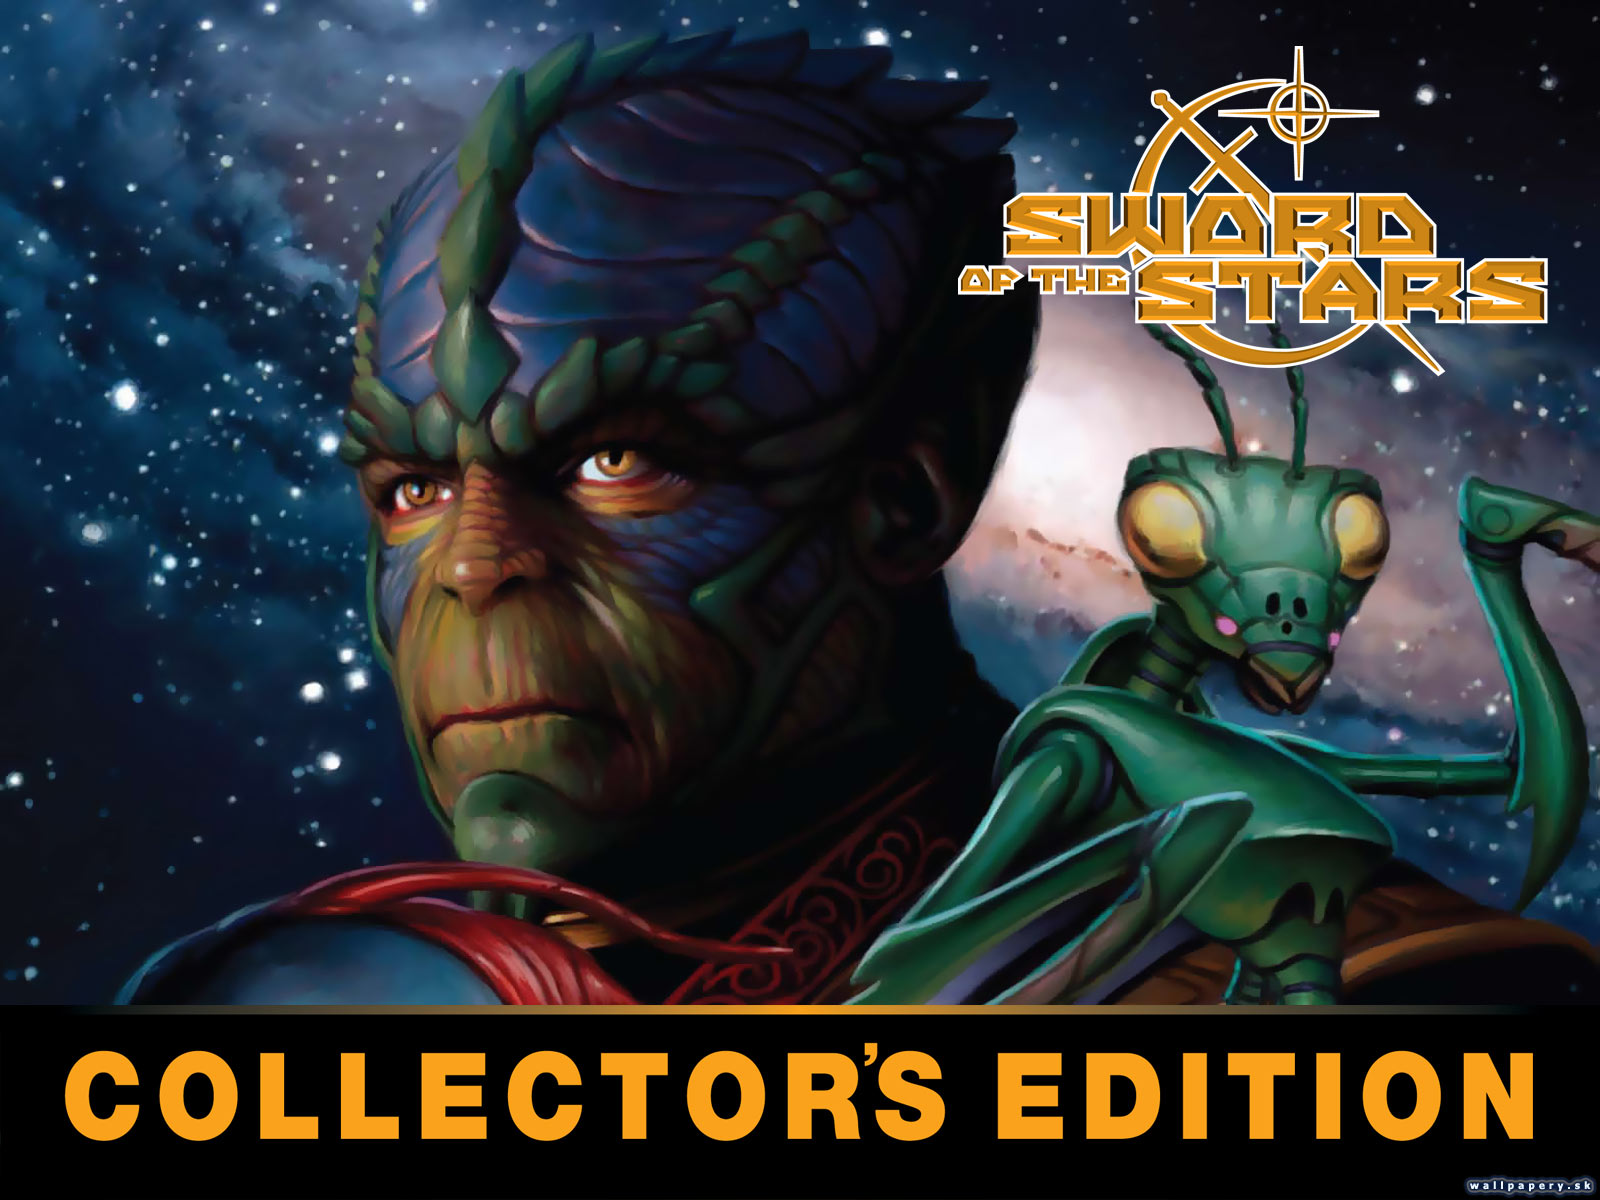 Sword of the Stars: Collector's Edition - wallpaper 2